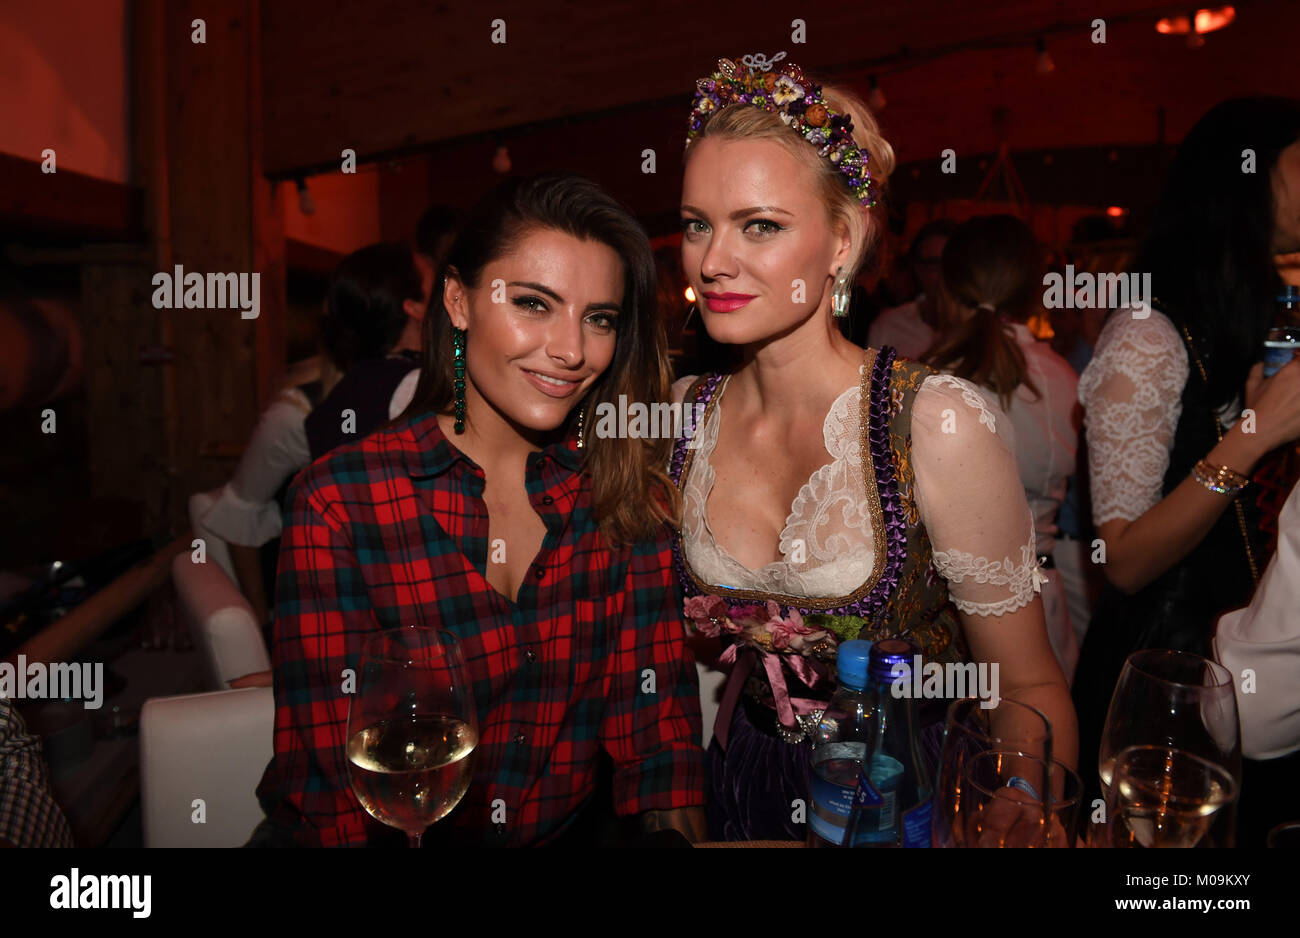 Actress Sophia Thomalla (L) and model Franziska Knuppe attend the 27th traditional 'Weisswurst party' (lit. Bavarian white sausage party) at the Stanglwirt Inn in Going, Germany, 19 January 2018. The 'Weisswurst party' is an event where stars and celebrities meet a day before the legendary Hahnenkamm downhill race. Photo: Felix Hörhager/dpa Stock Photo